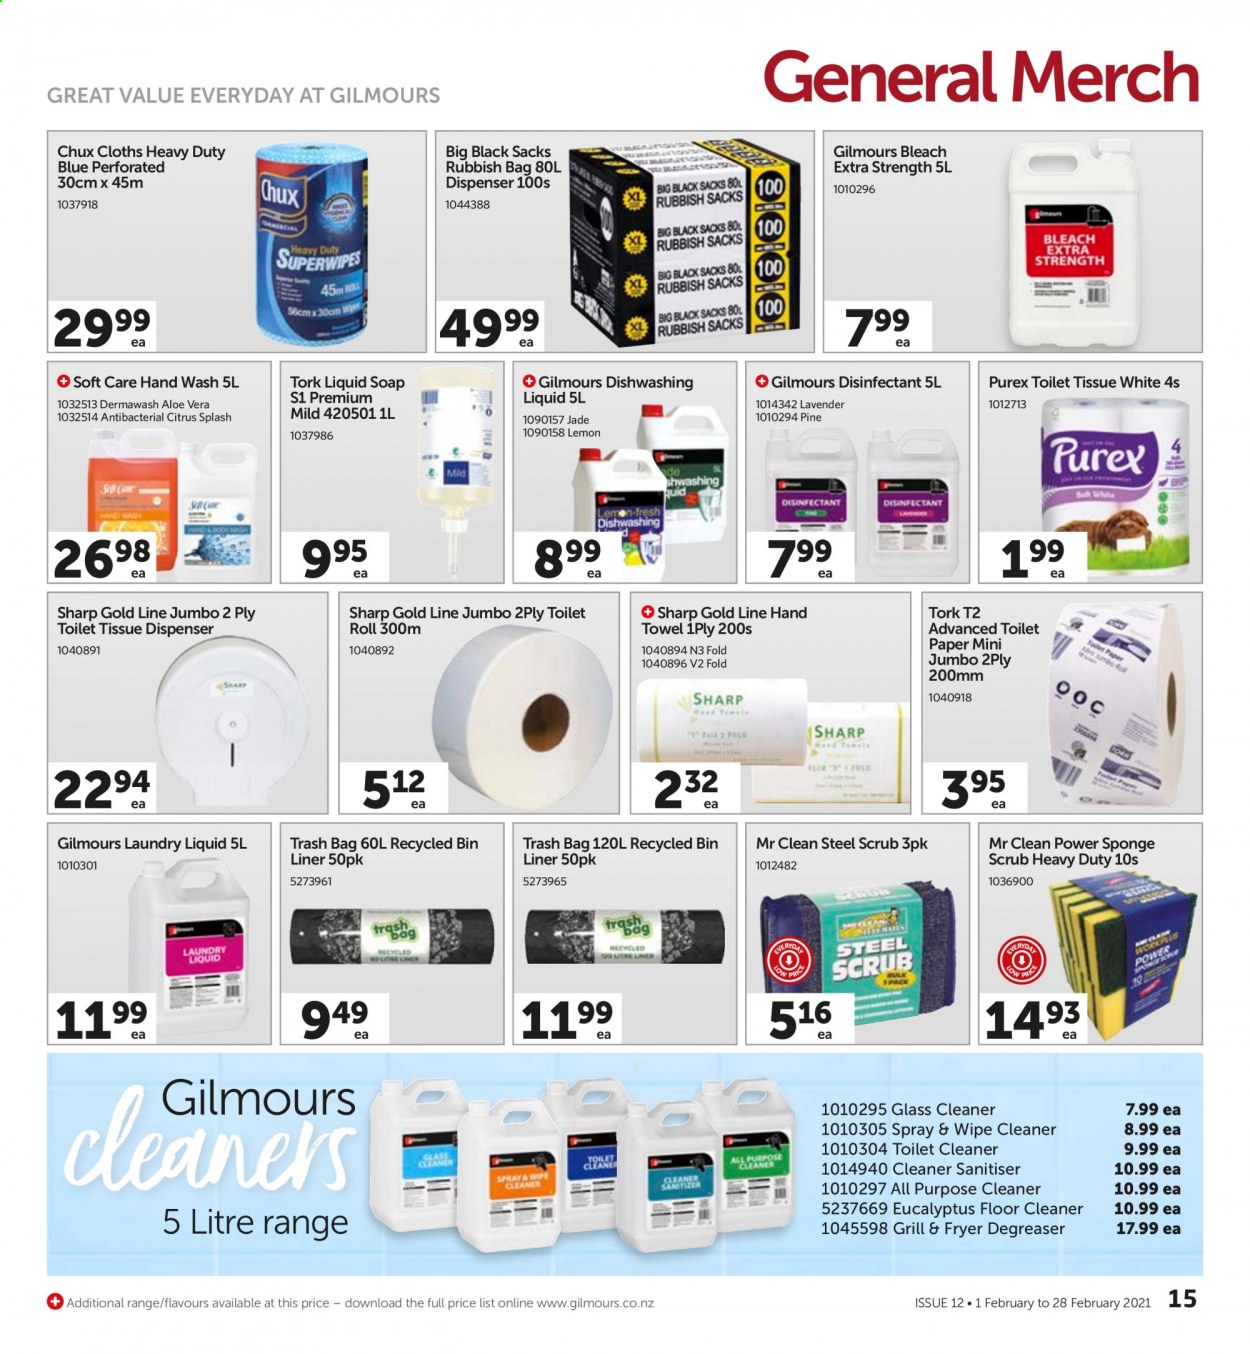 thumbnail - Gilmours mailer - 01.02.2021 - 28.02.2021 - Sales products - toilet paper, tissues, cleaner, desinfection, all purpose cleaner, floor cleaner, toilet cleaner, glass cleaner, bleach, laundry detergent, Purex, dishwashing liquid. Page 15.